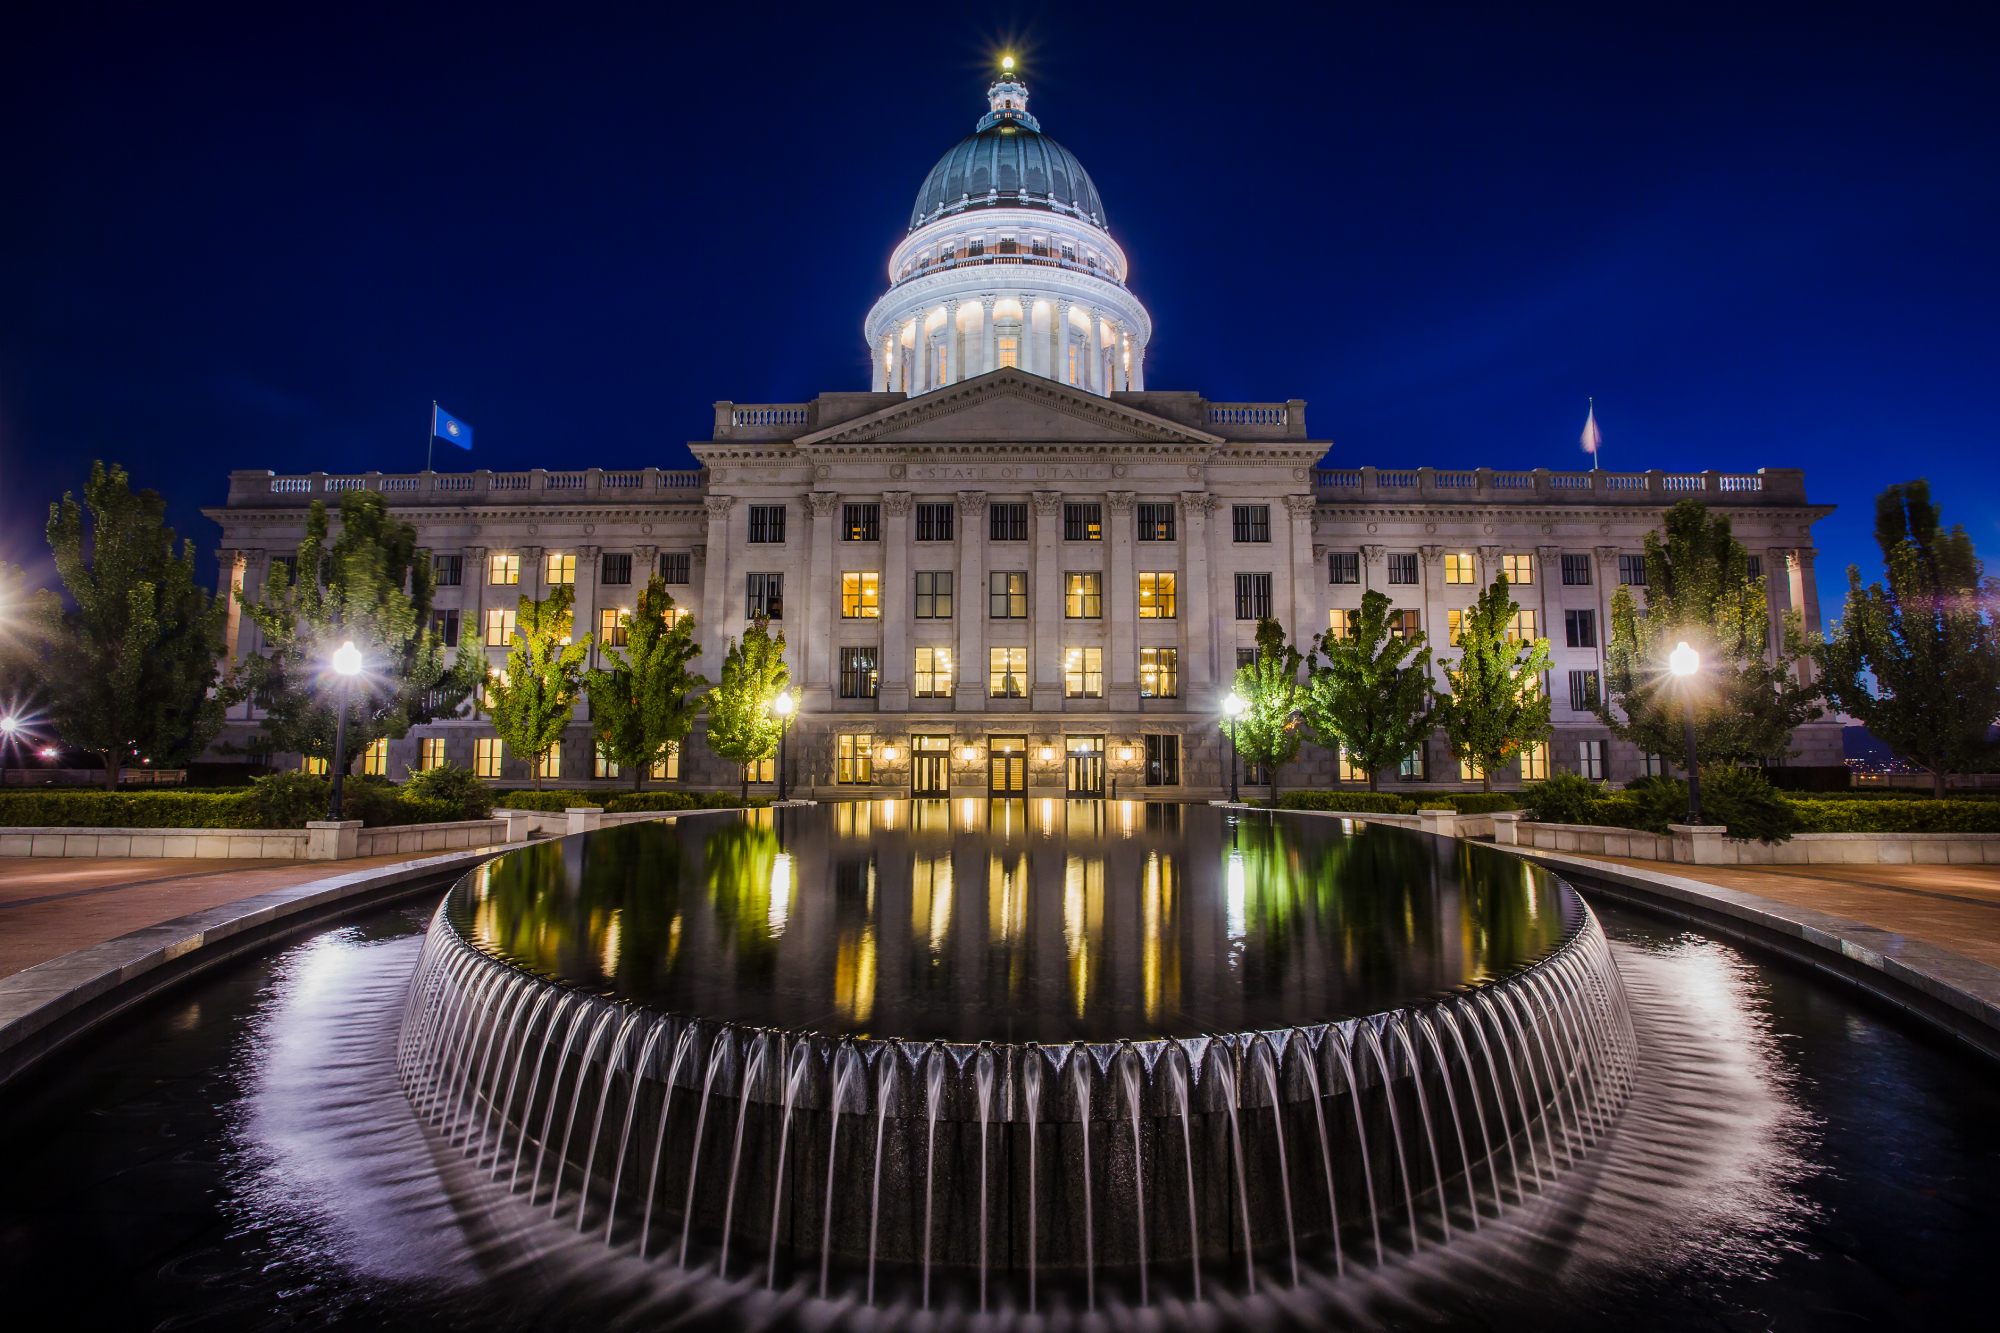 HDR Photography Workshop: Salt Lake Capital HDR | Pt.2 | RAW Preparation and HDR Export